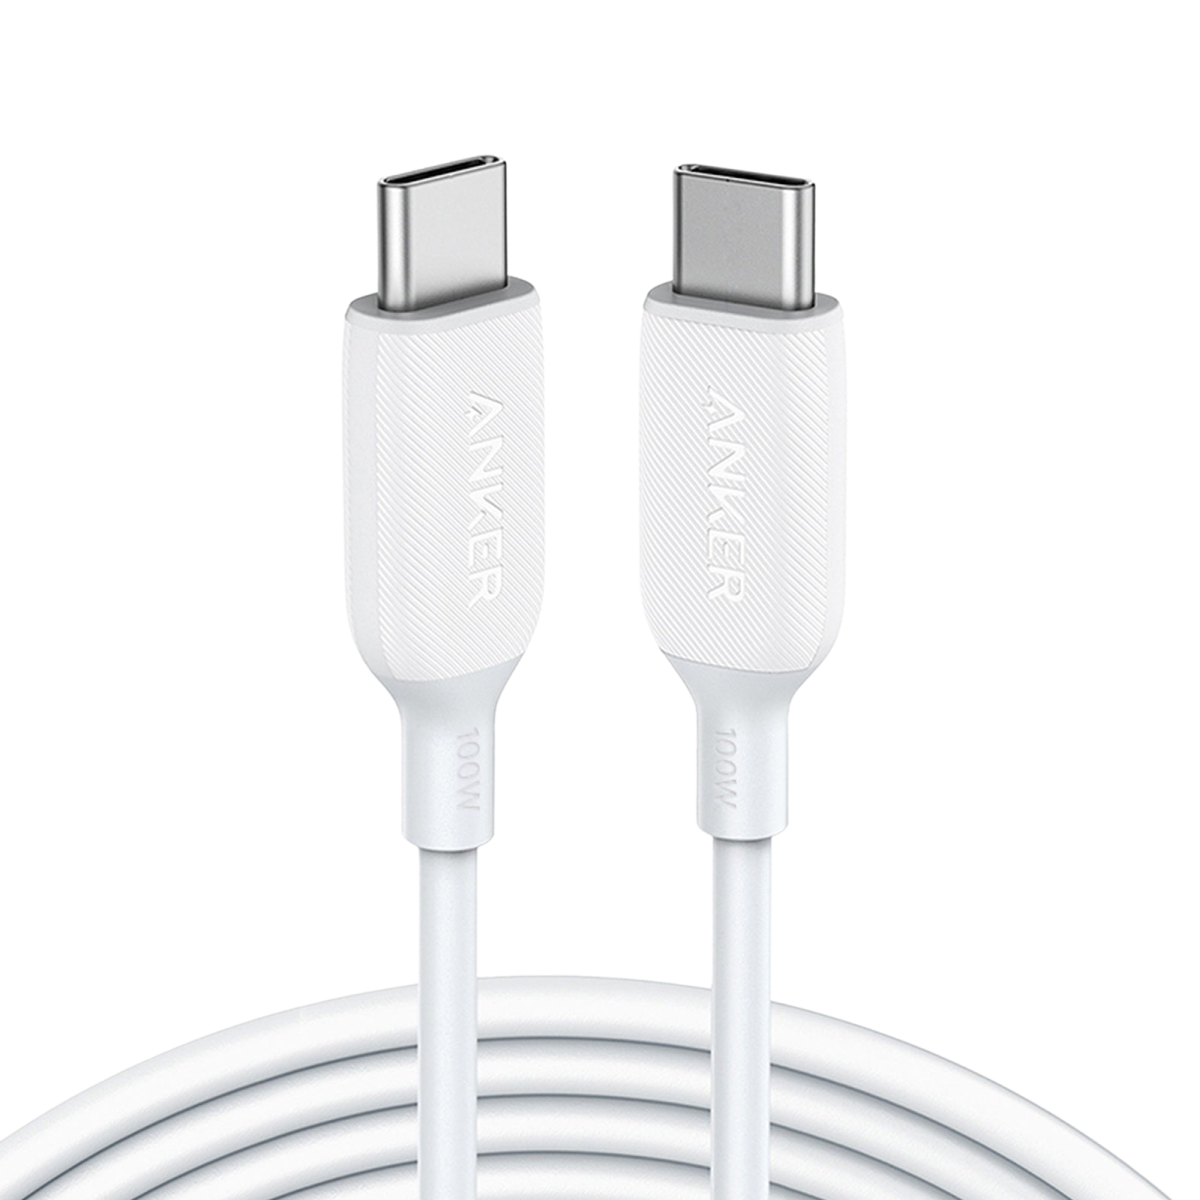 Anker 543 USB-C to USB-C Cable (6ft) White